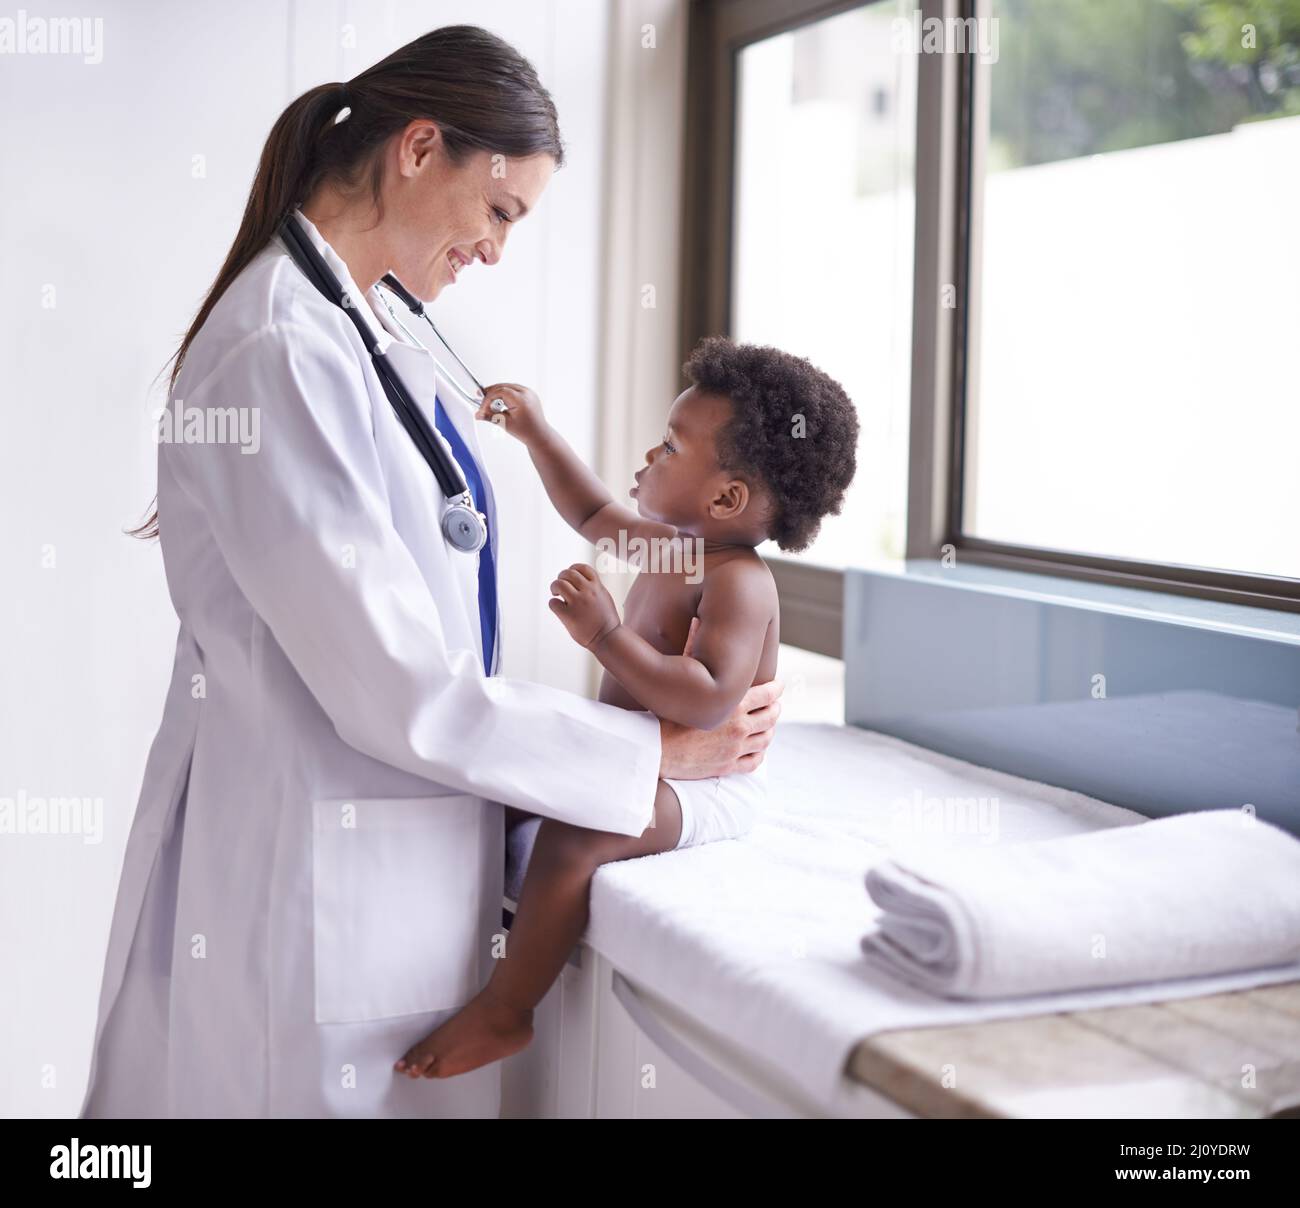 Just in for a routine pediatric checkup. Cropped shot of a female pediatrician doing a checkup on an adorable baby boy. Stock Photo